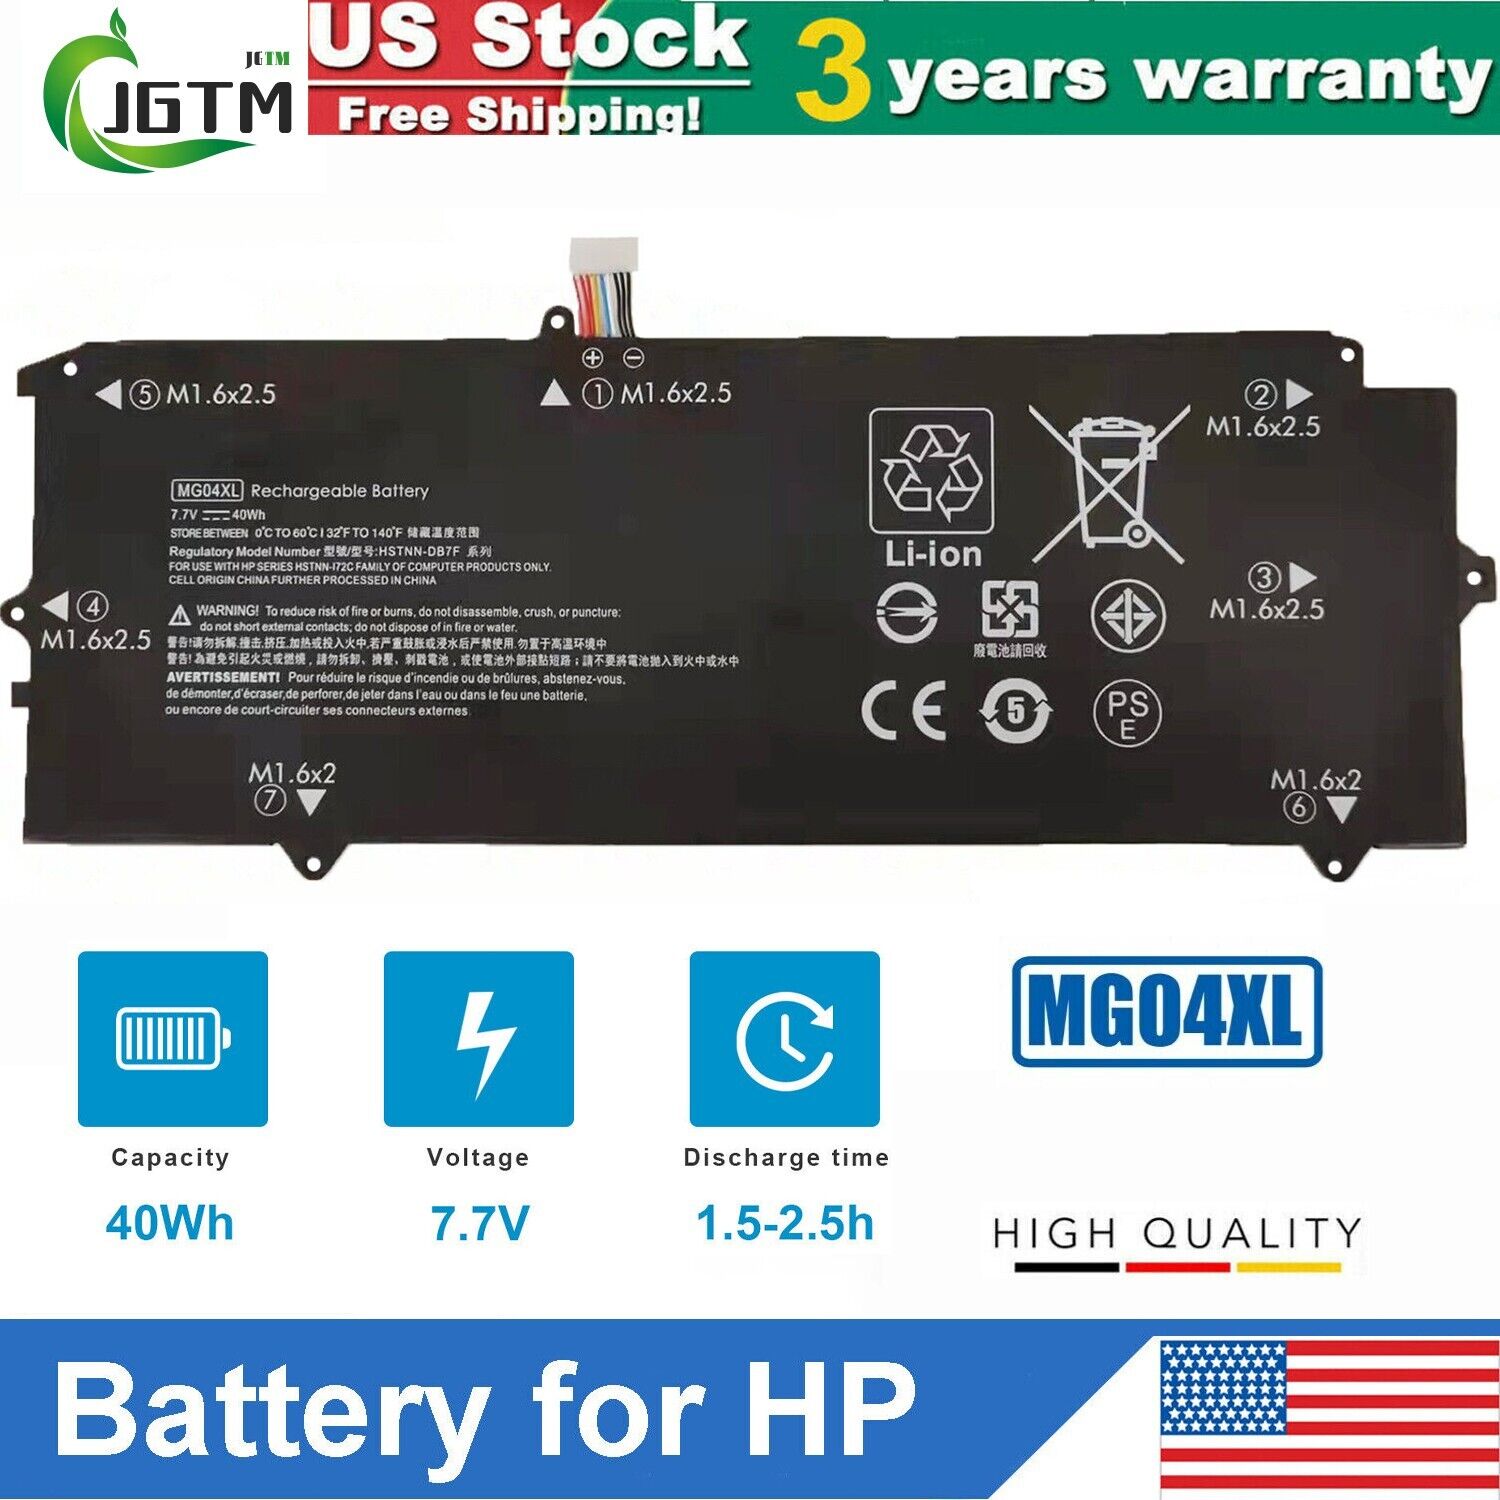 MG04 MG04XL Laptop Battery For HP Elite X2 1012 G1 Series 812205-001 40Wh 7.7V